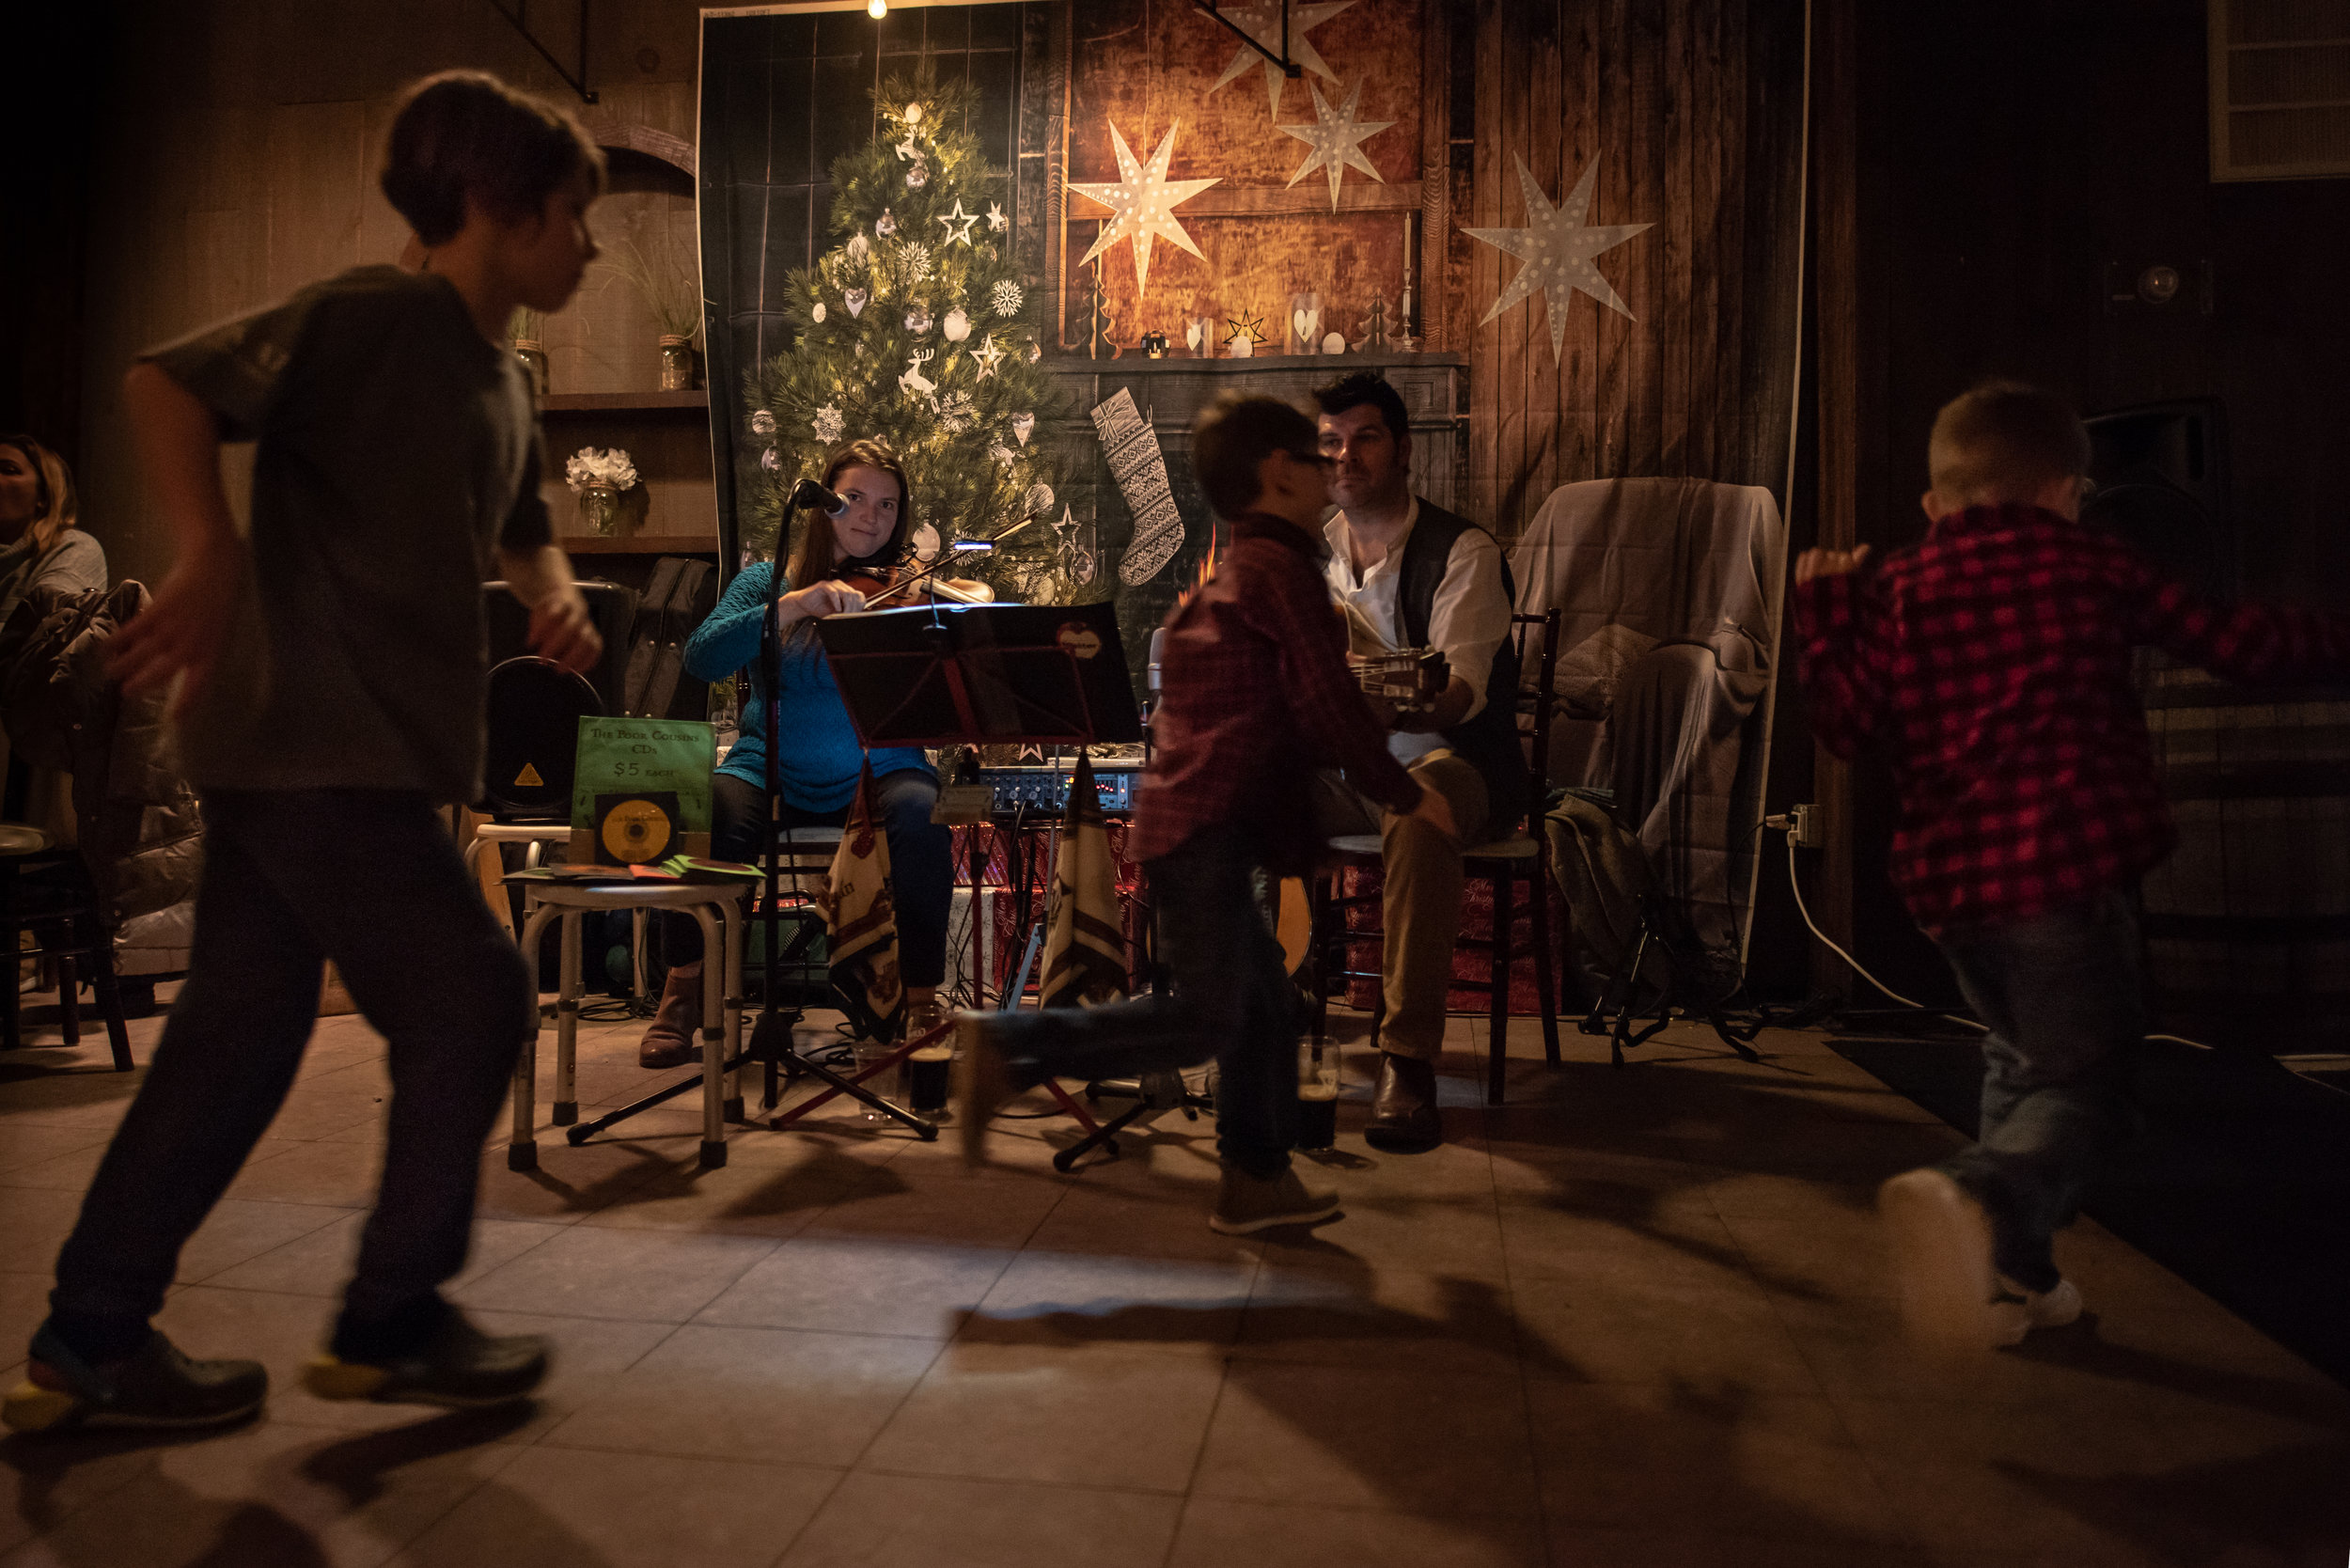  The Poor Cousins round out the holiday season with a performance at an Irish themed holiday dinner in Far Rockaway, New York. 